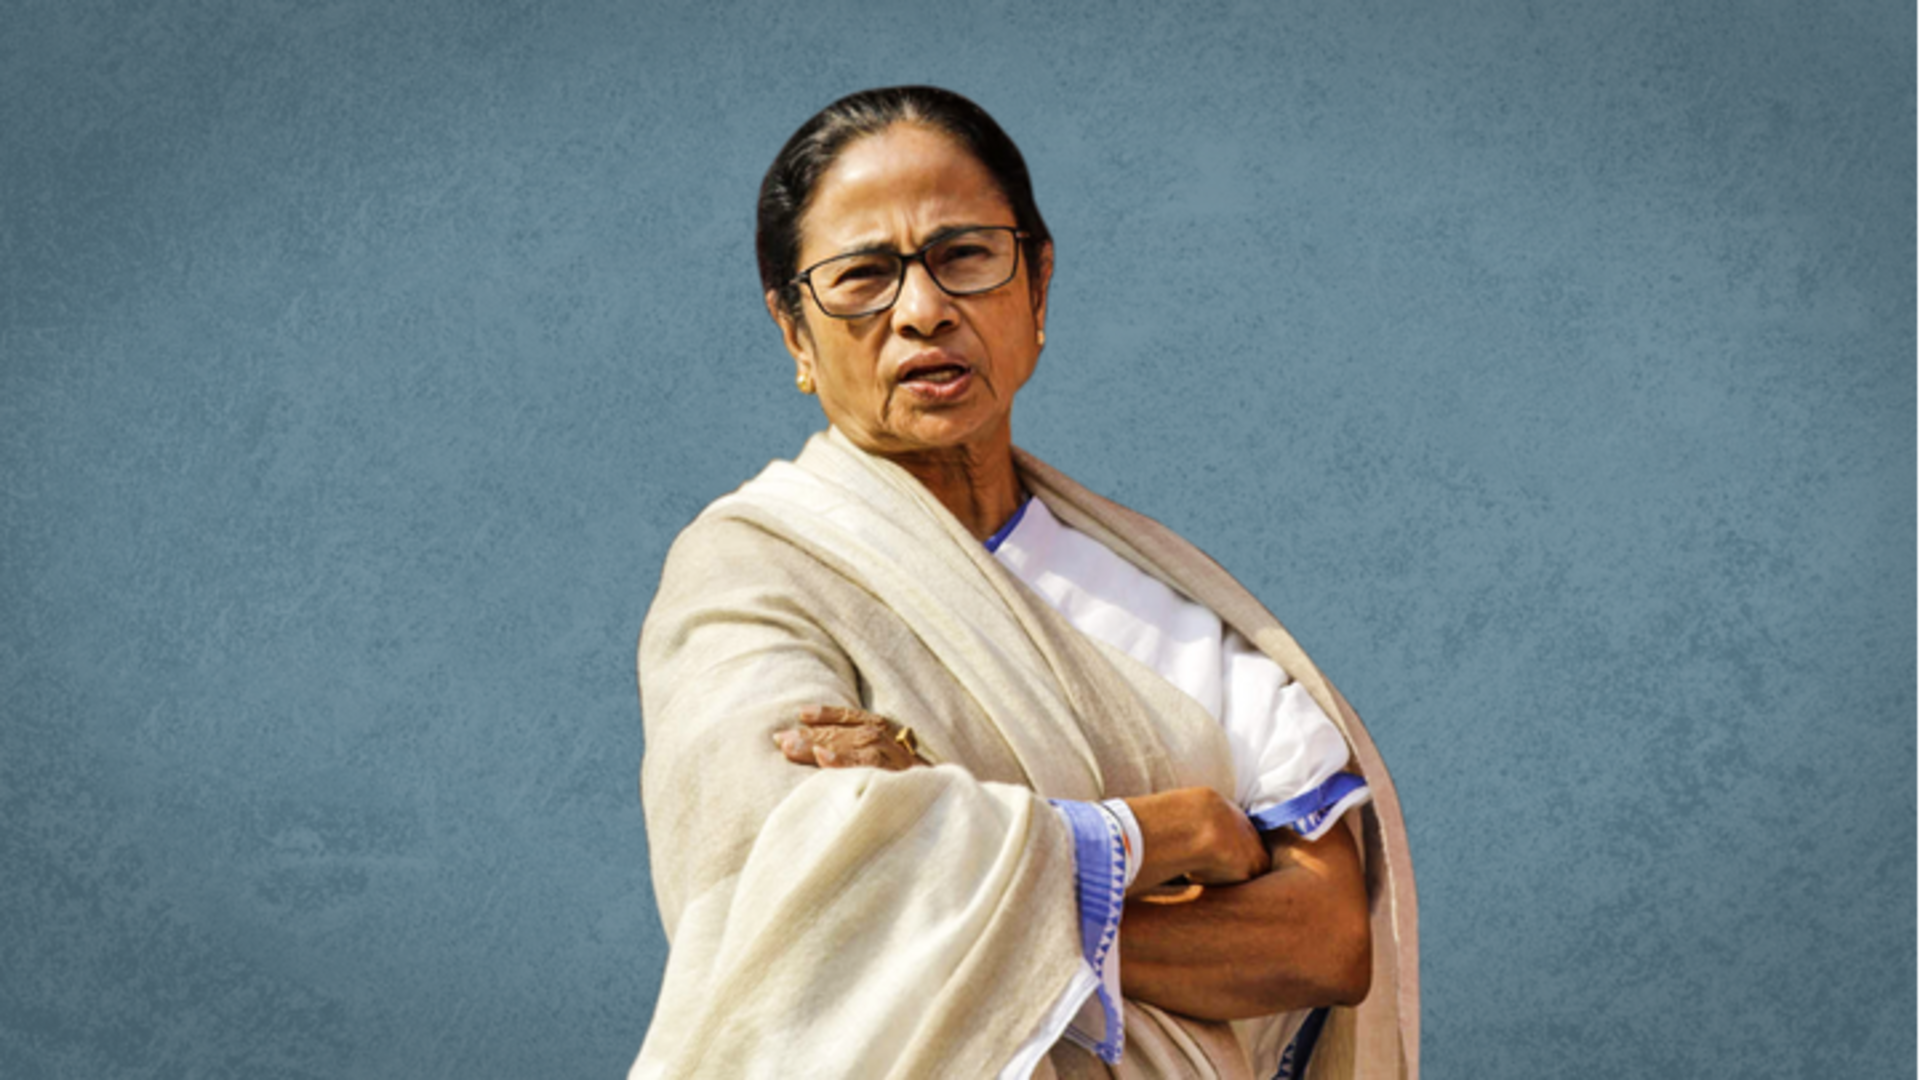 Mamata extends support to Congress in 2024 elections, party reacts